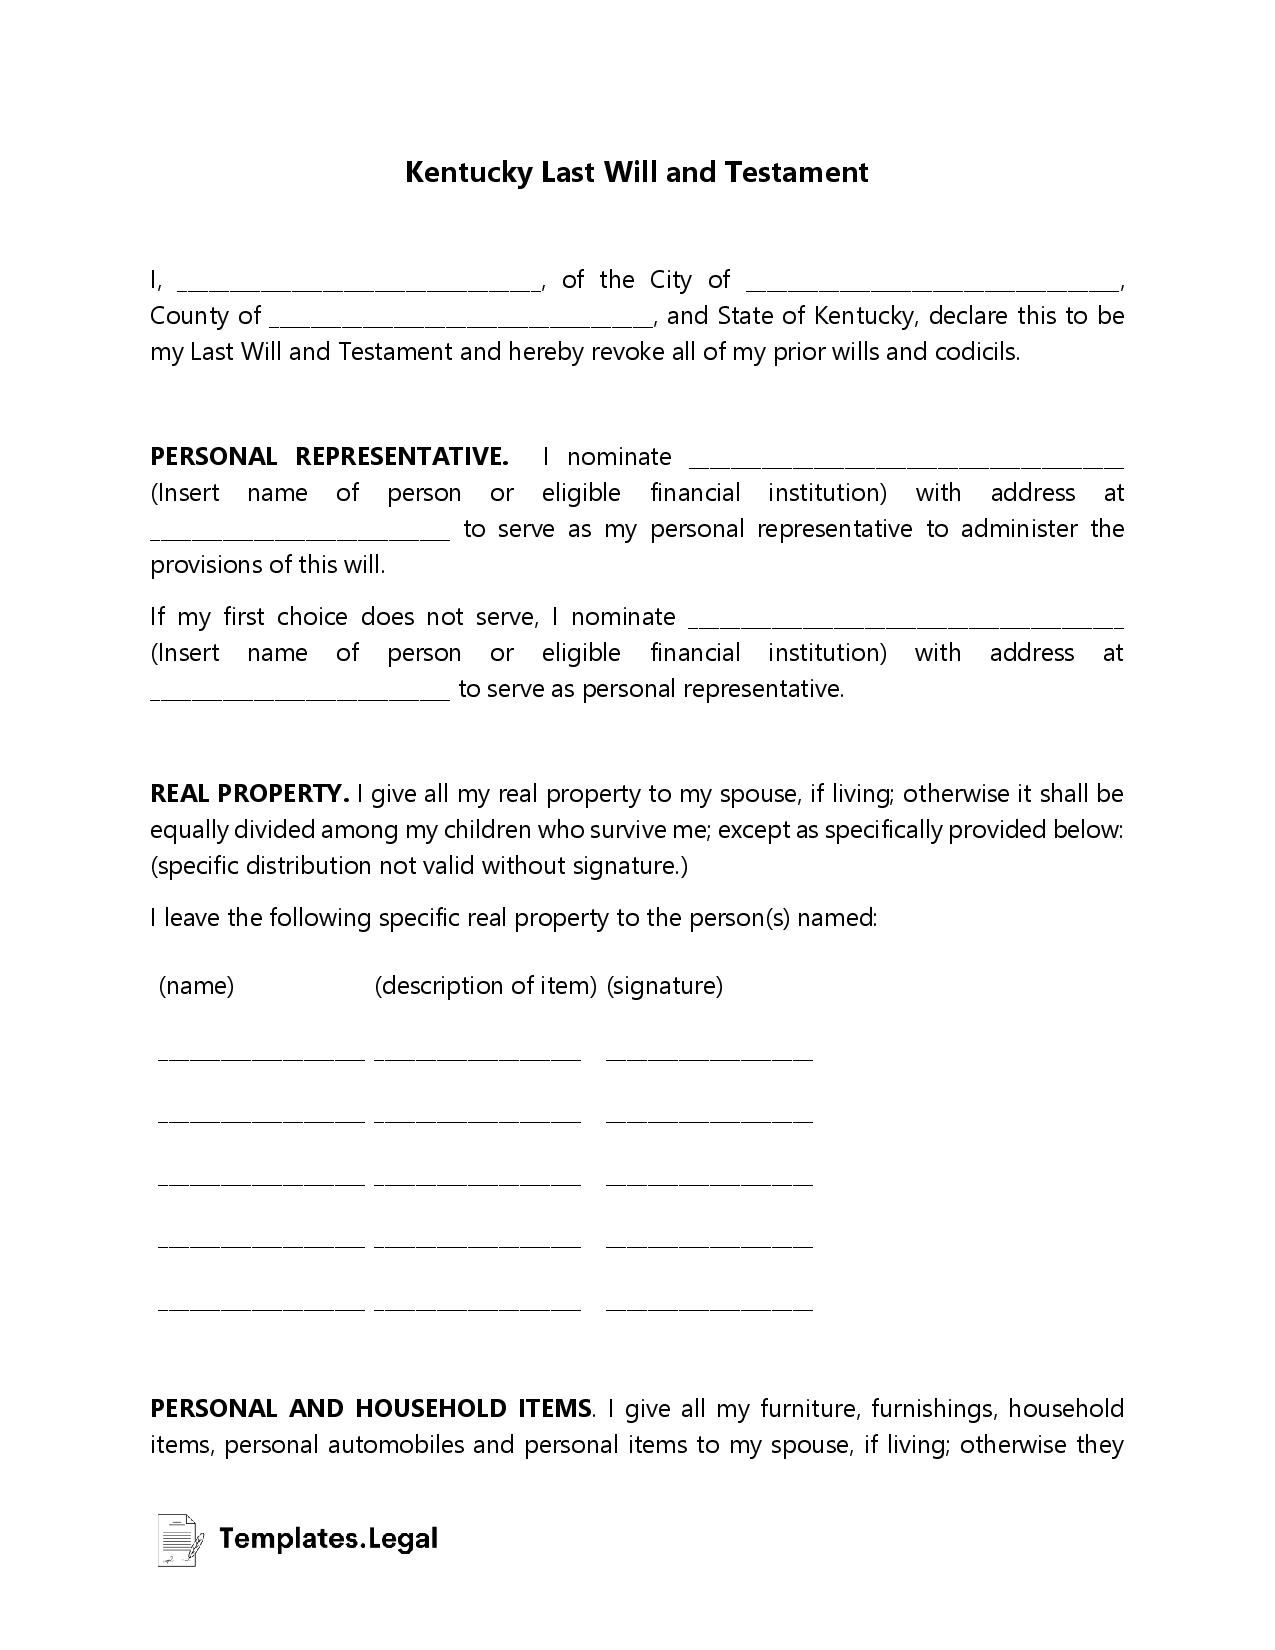 Kentucky Last Will and Testament - Templates.Legal